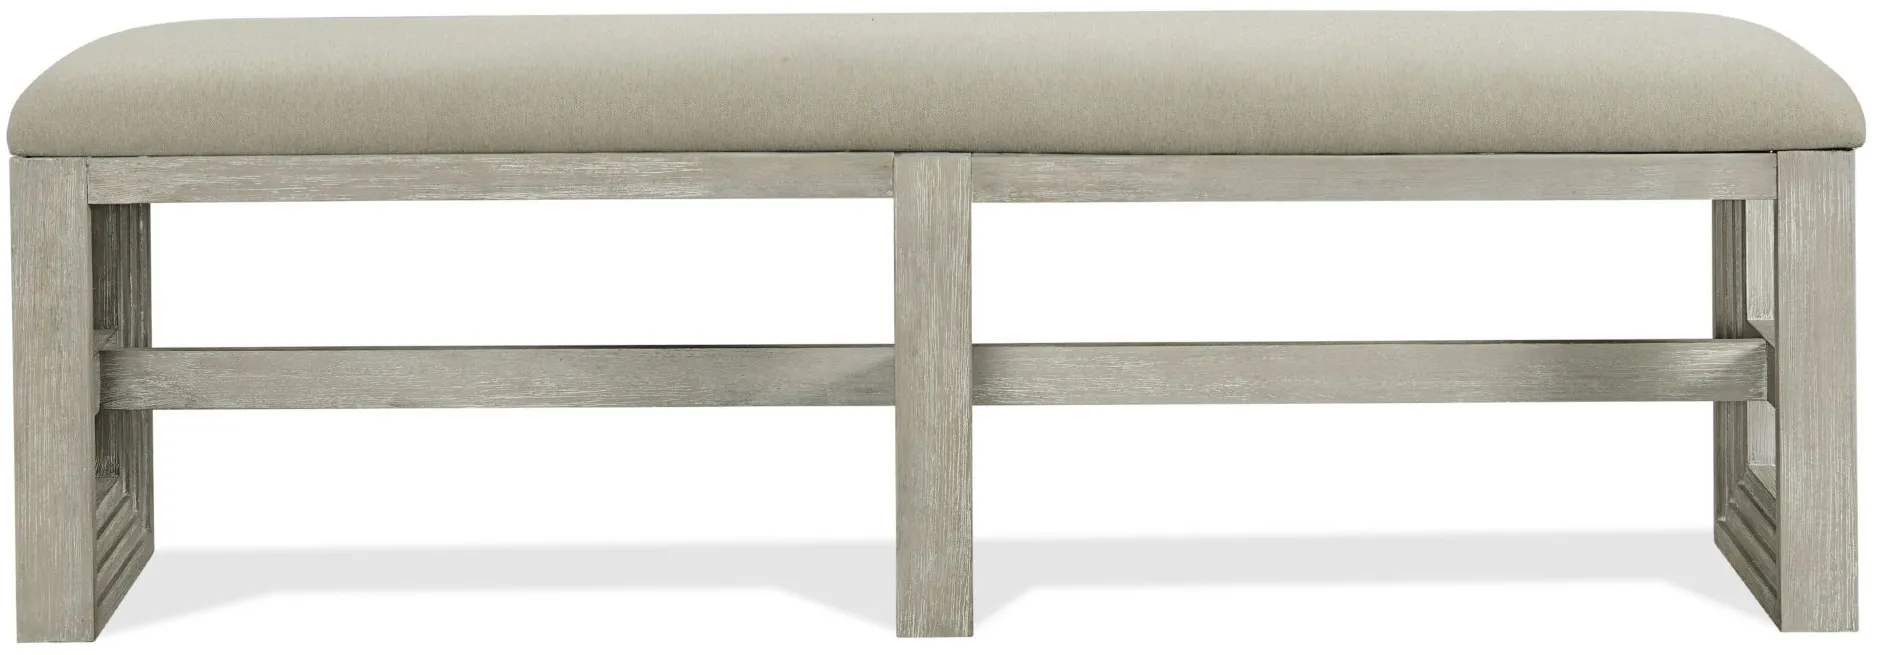 Cascade Upholstered Dining Bench in Dovetail by Riverside Furniture